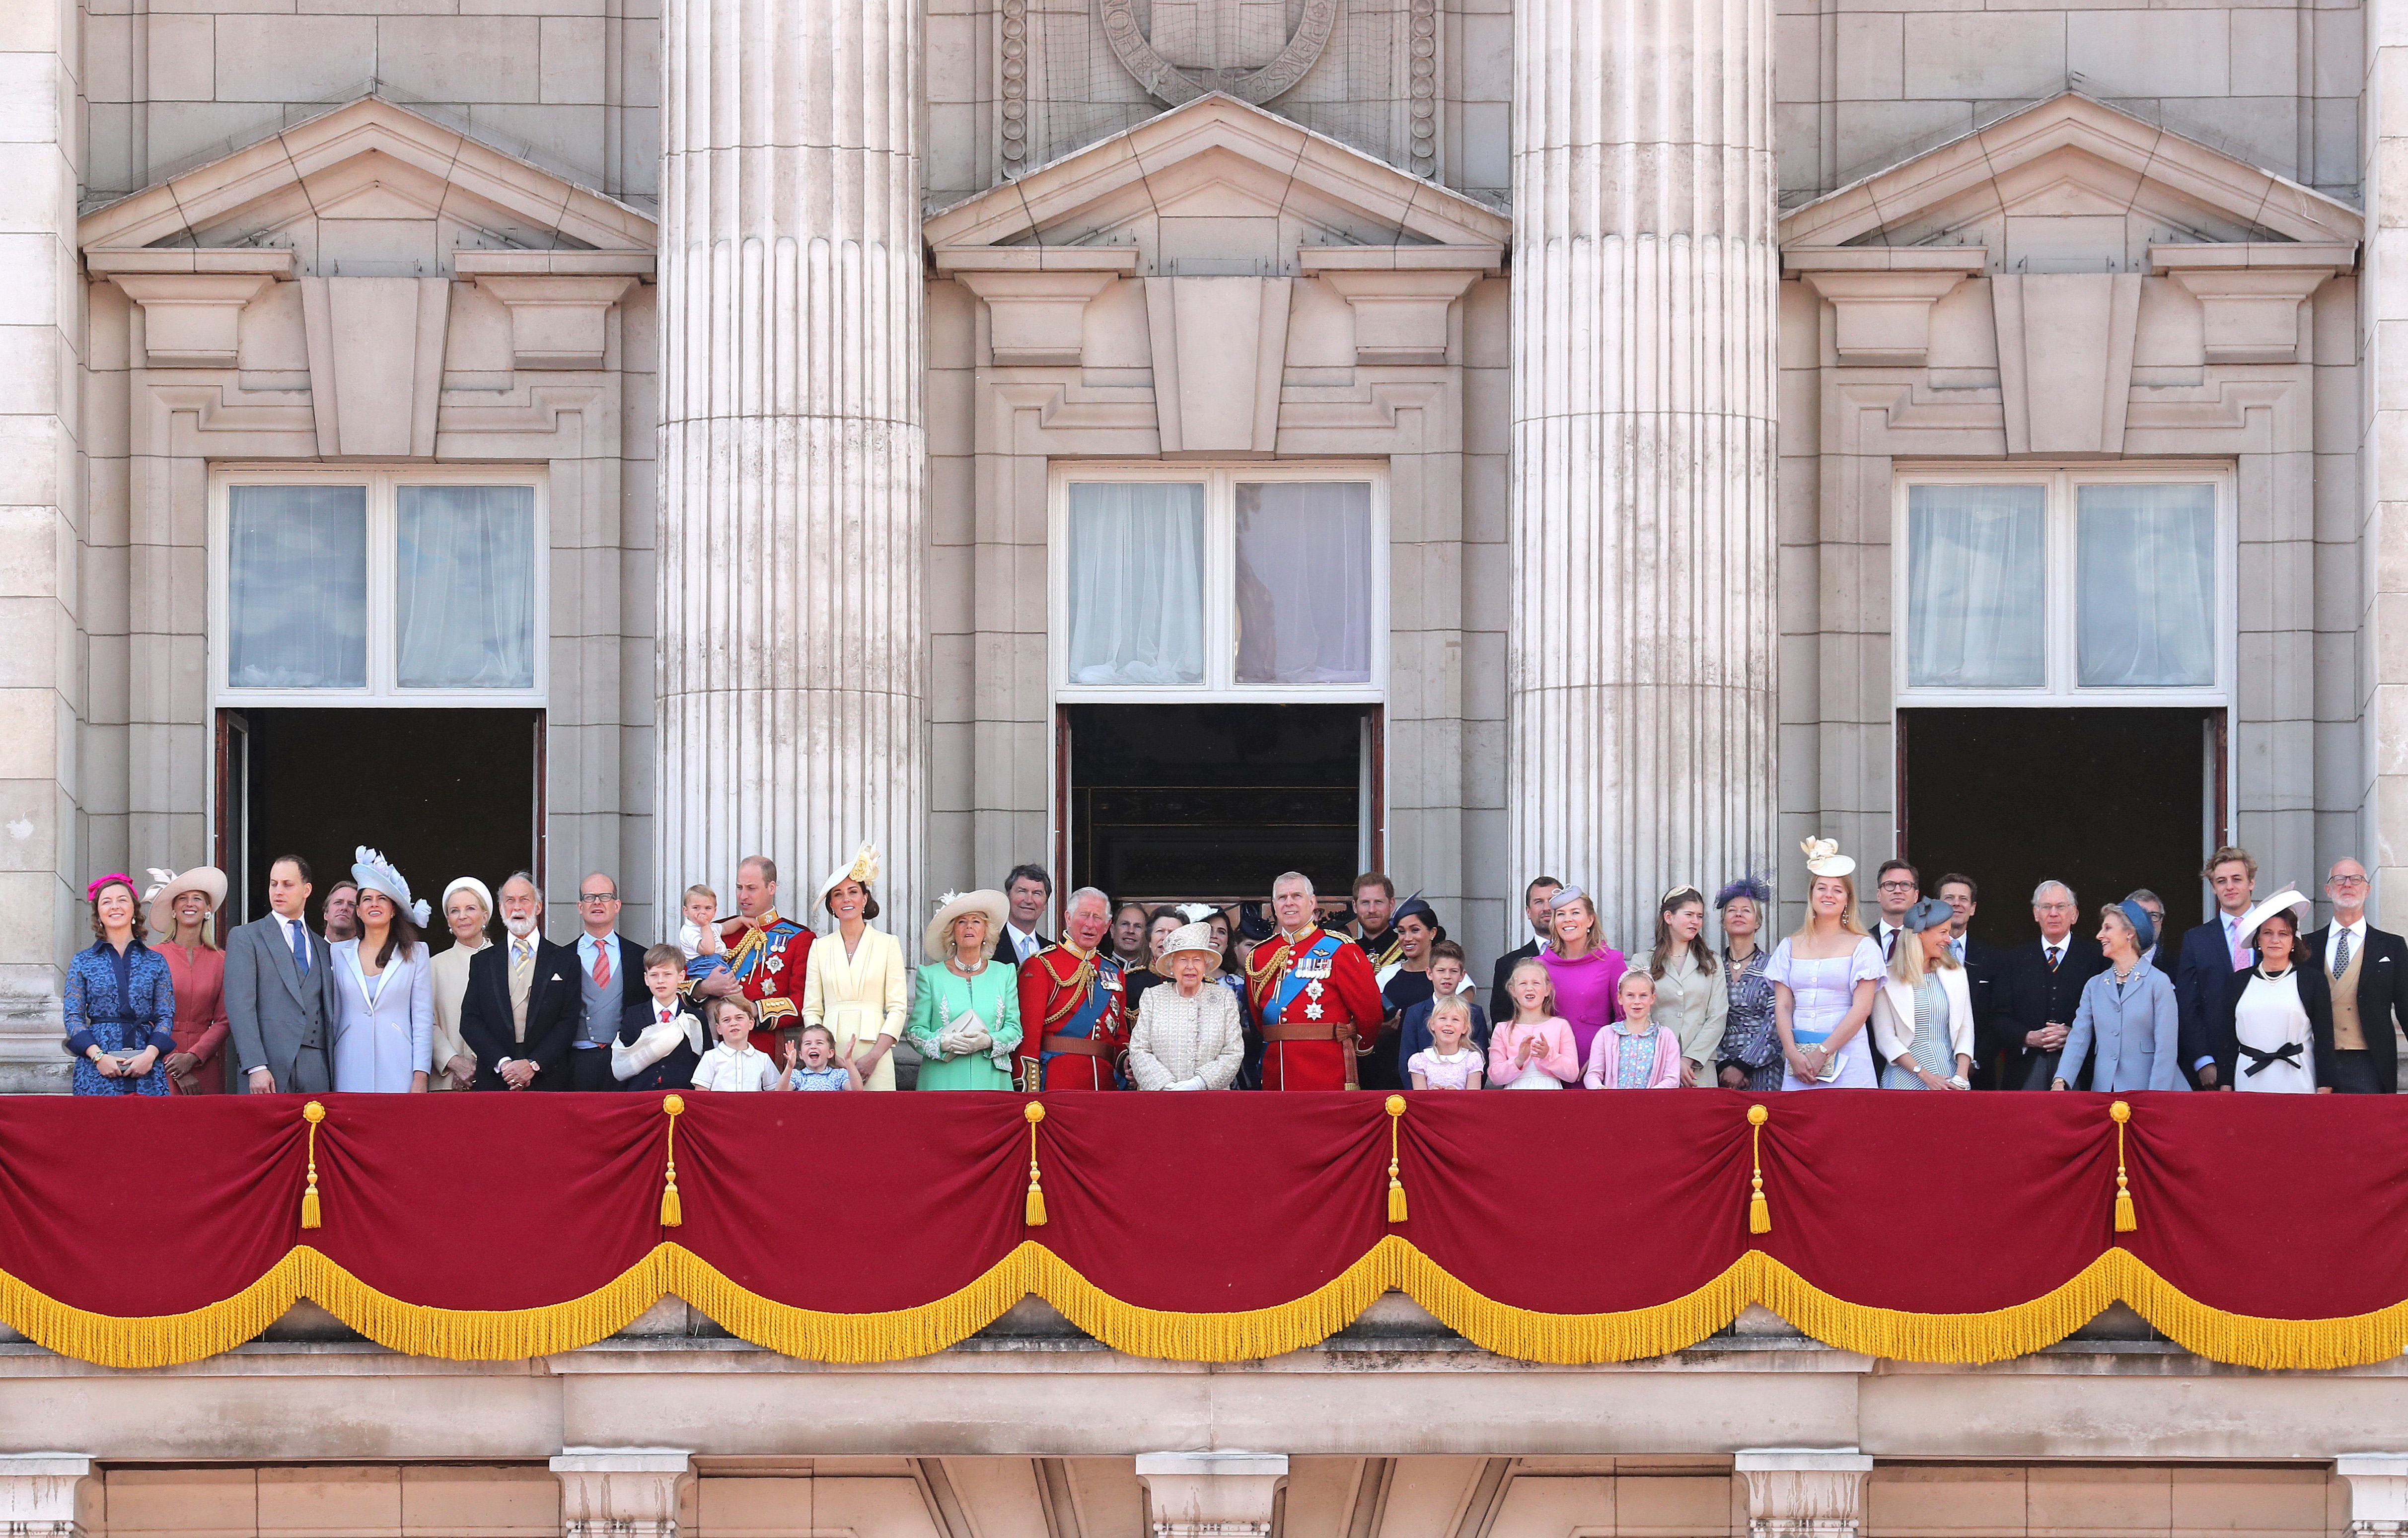 The royal family on the balcony of Buckingham Palace to watch a fly-past of aircraft by the Royal Air Force during Trooping The Colour, the Queen's annual birthday parade, on June 8, 2019 in London, England | Source: Getty Images